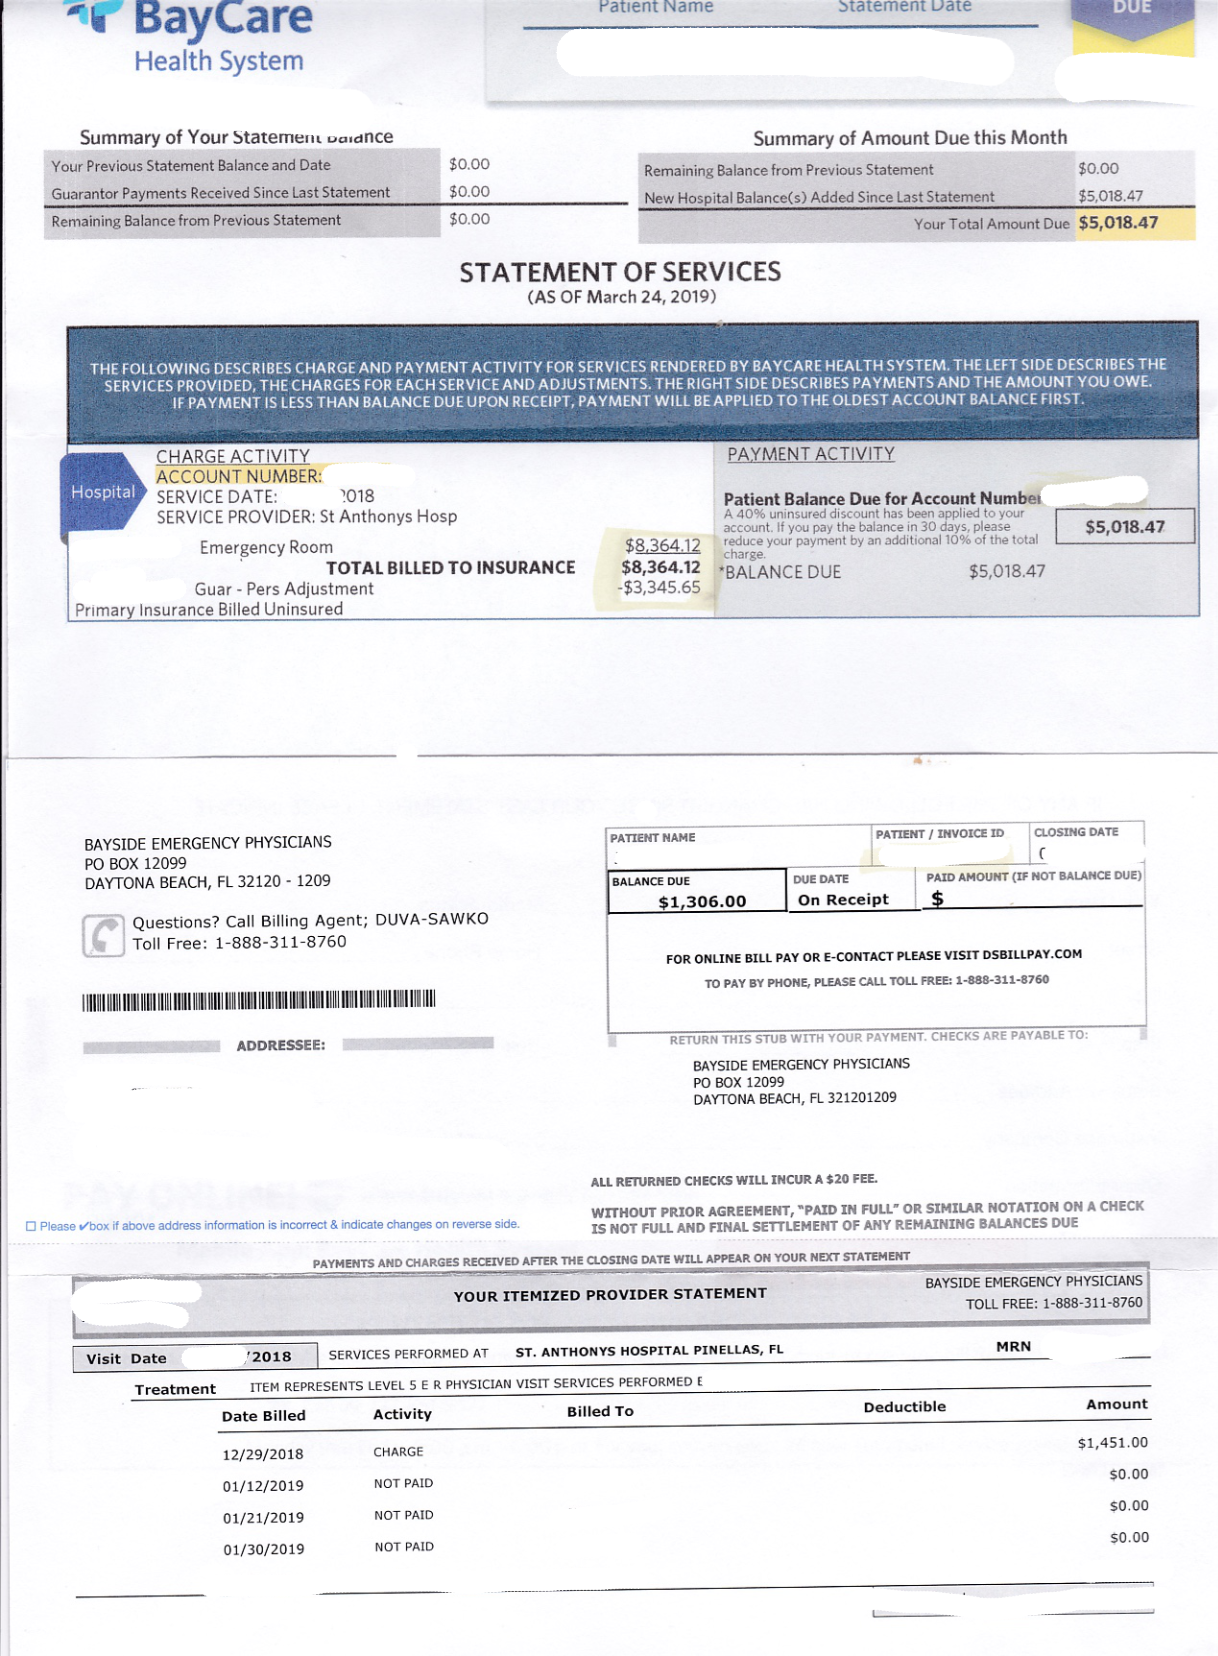 Abusive Medical Billing by BayCare Health Systems